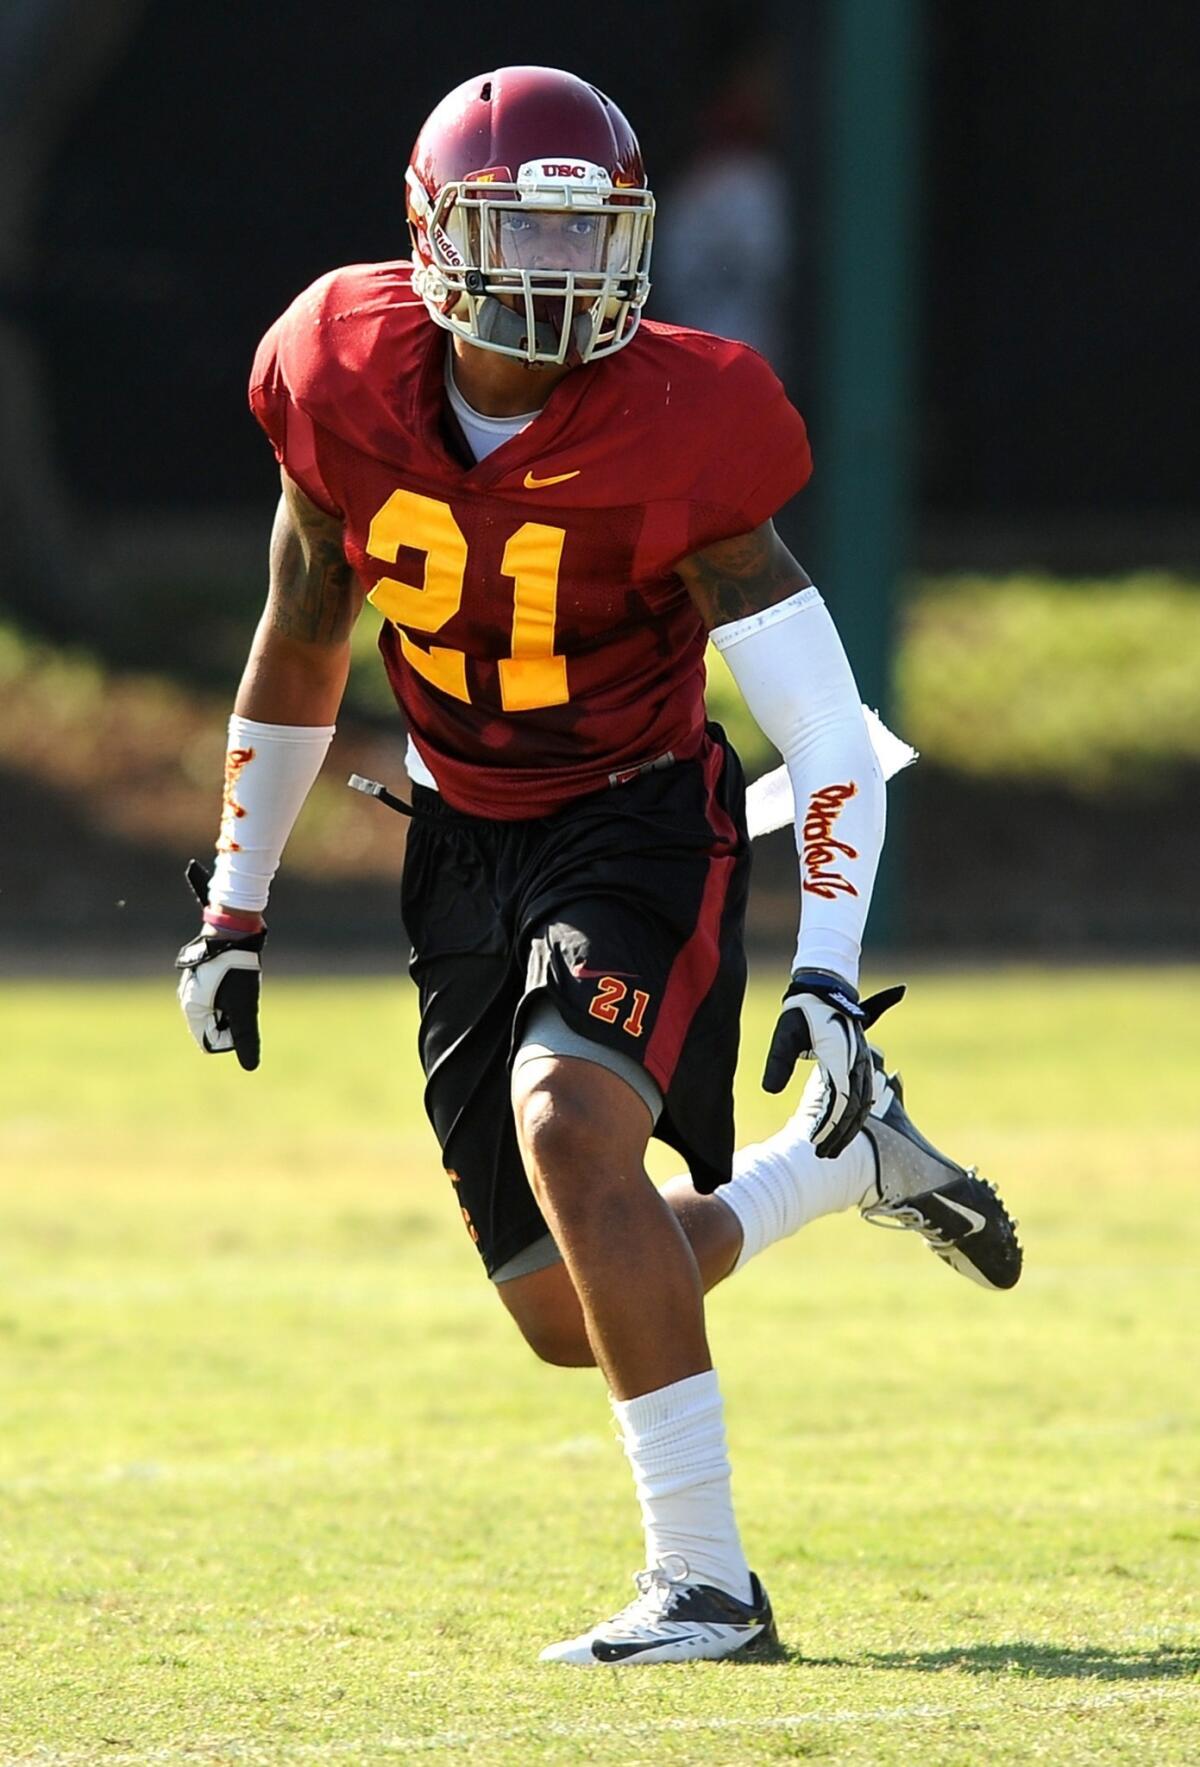 USC safety Su'a Cravens says he'll be healthy enough to play Friday against Oregon State.